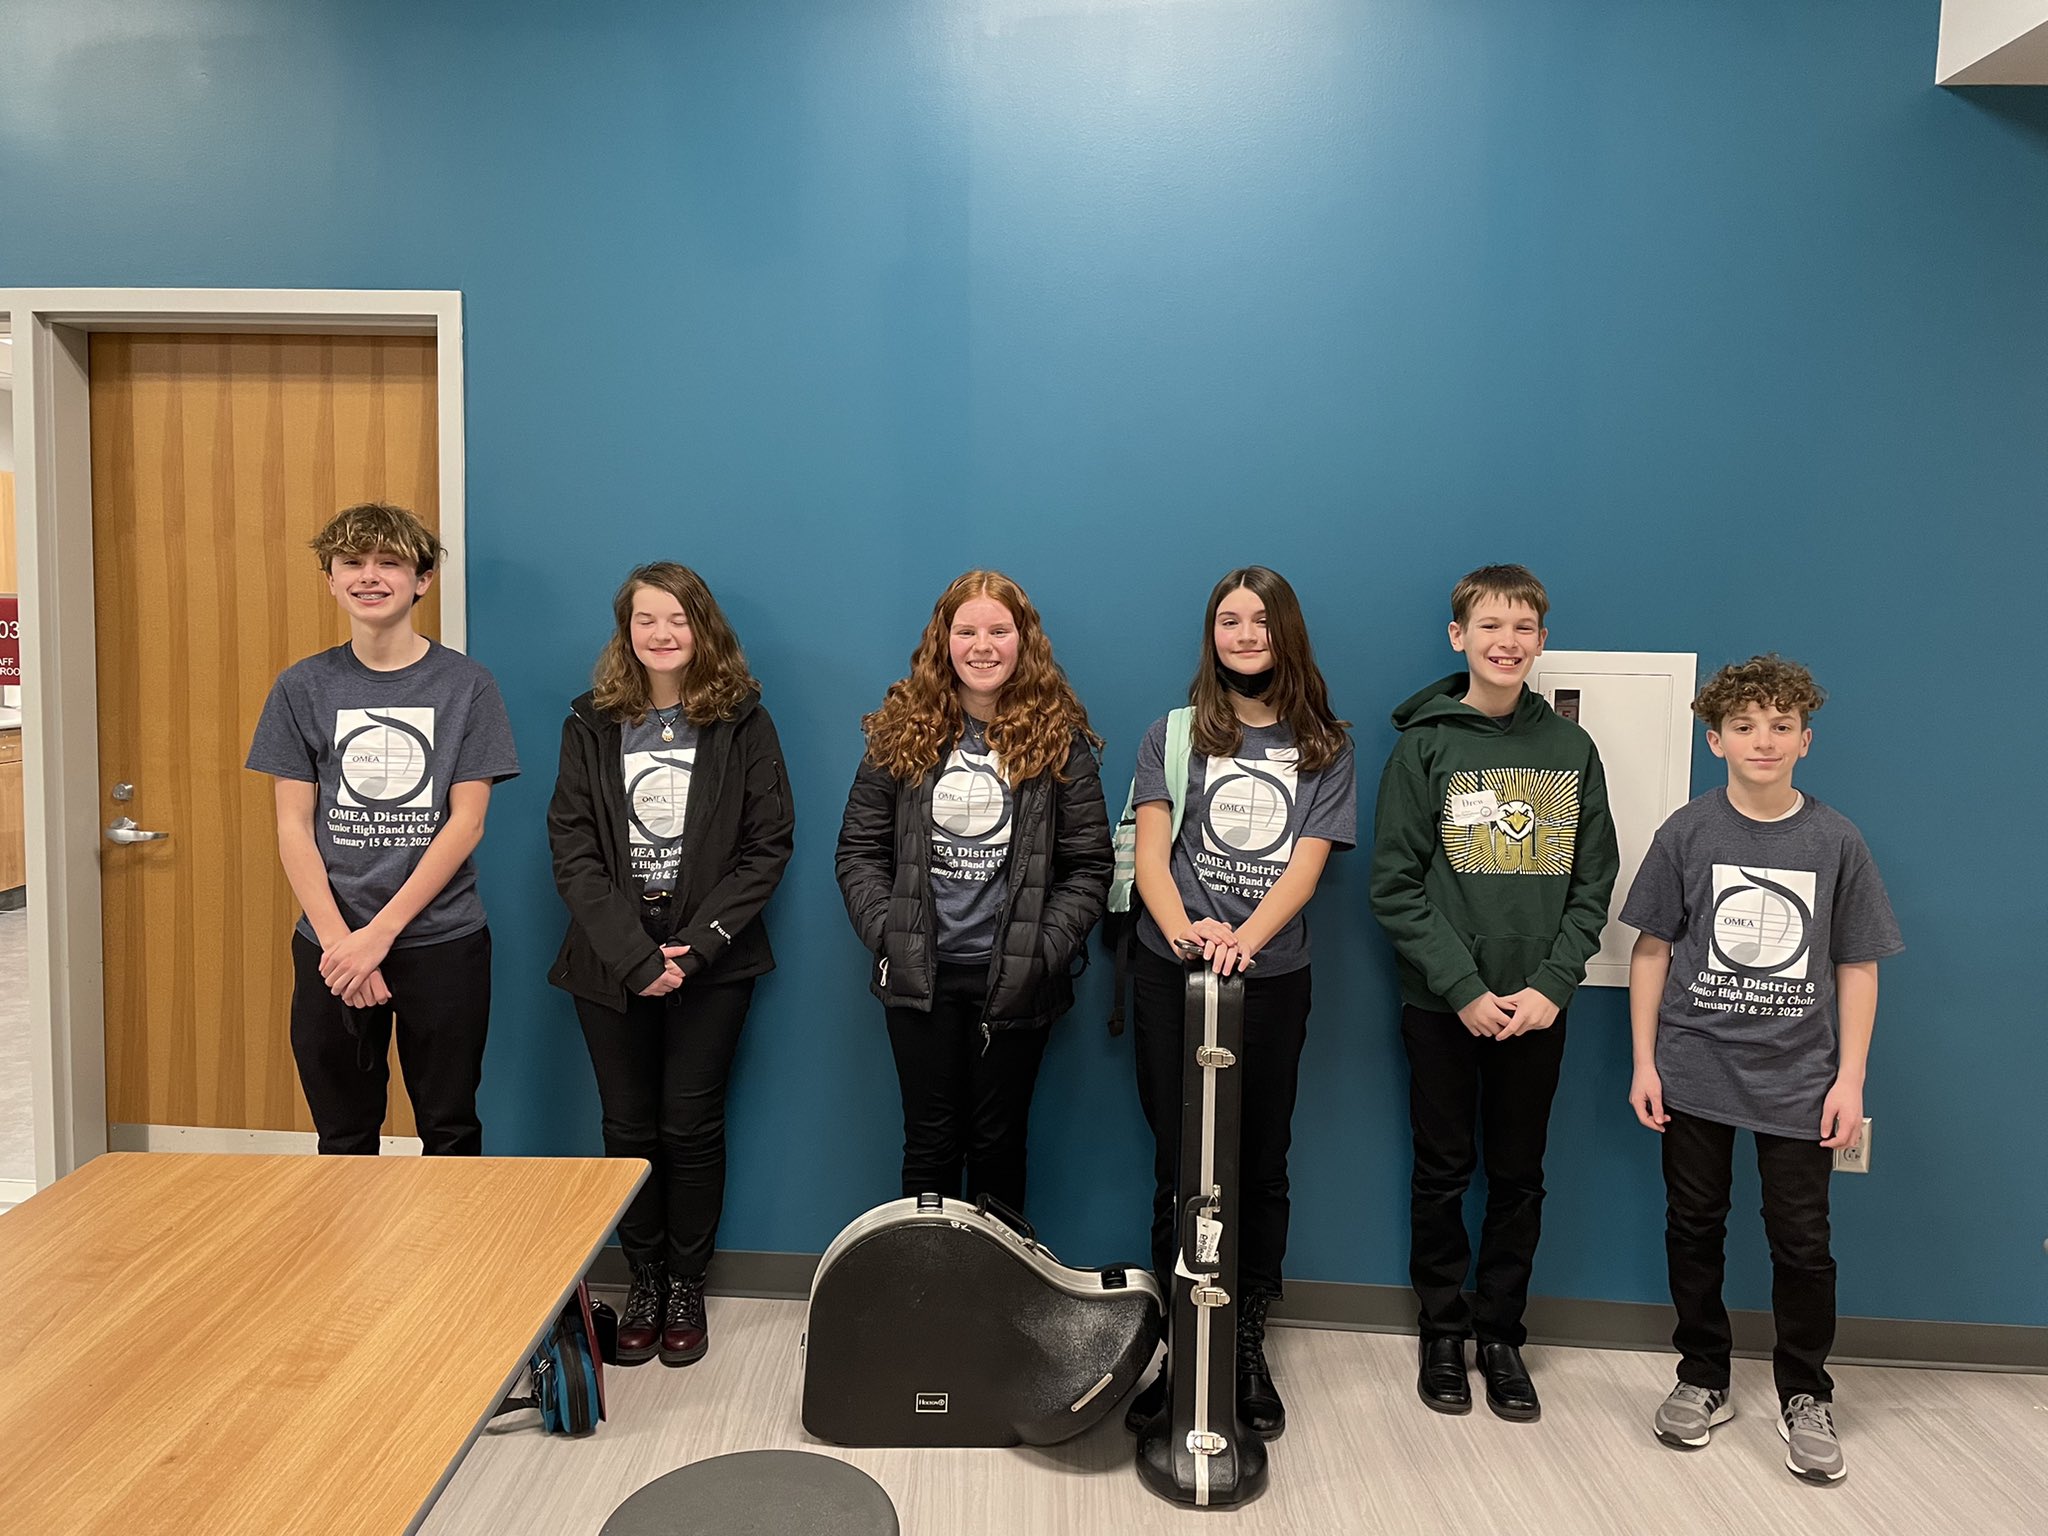 GlenOak Band on Twitter: "Today, six Oakwood Middle School Band students  participated in the finale concert for the OMEA D8 Honor Band. @PlainLocal  @GlenwoodBands Drew Nieporte, Alto Sax Leah Odegard, French Horn